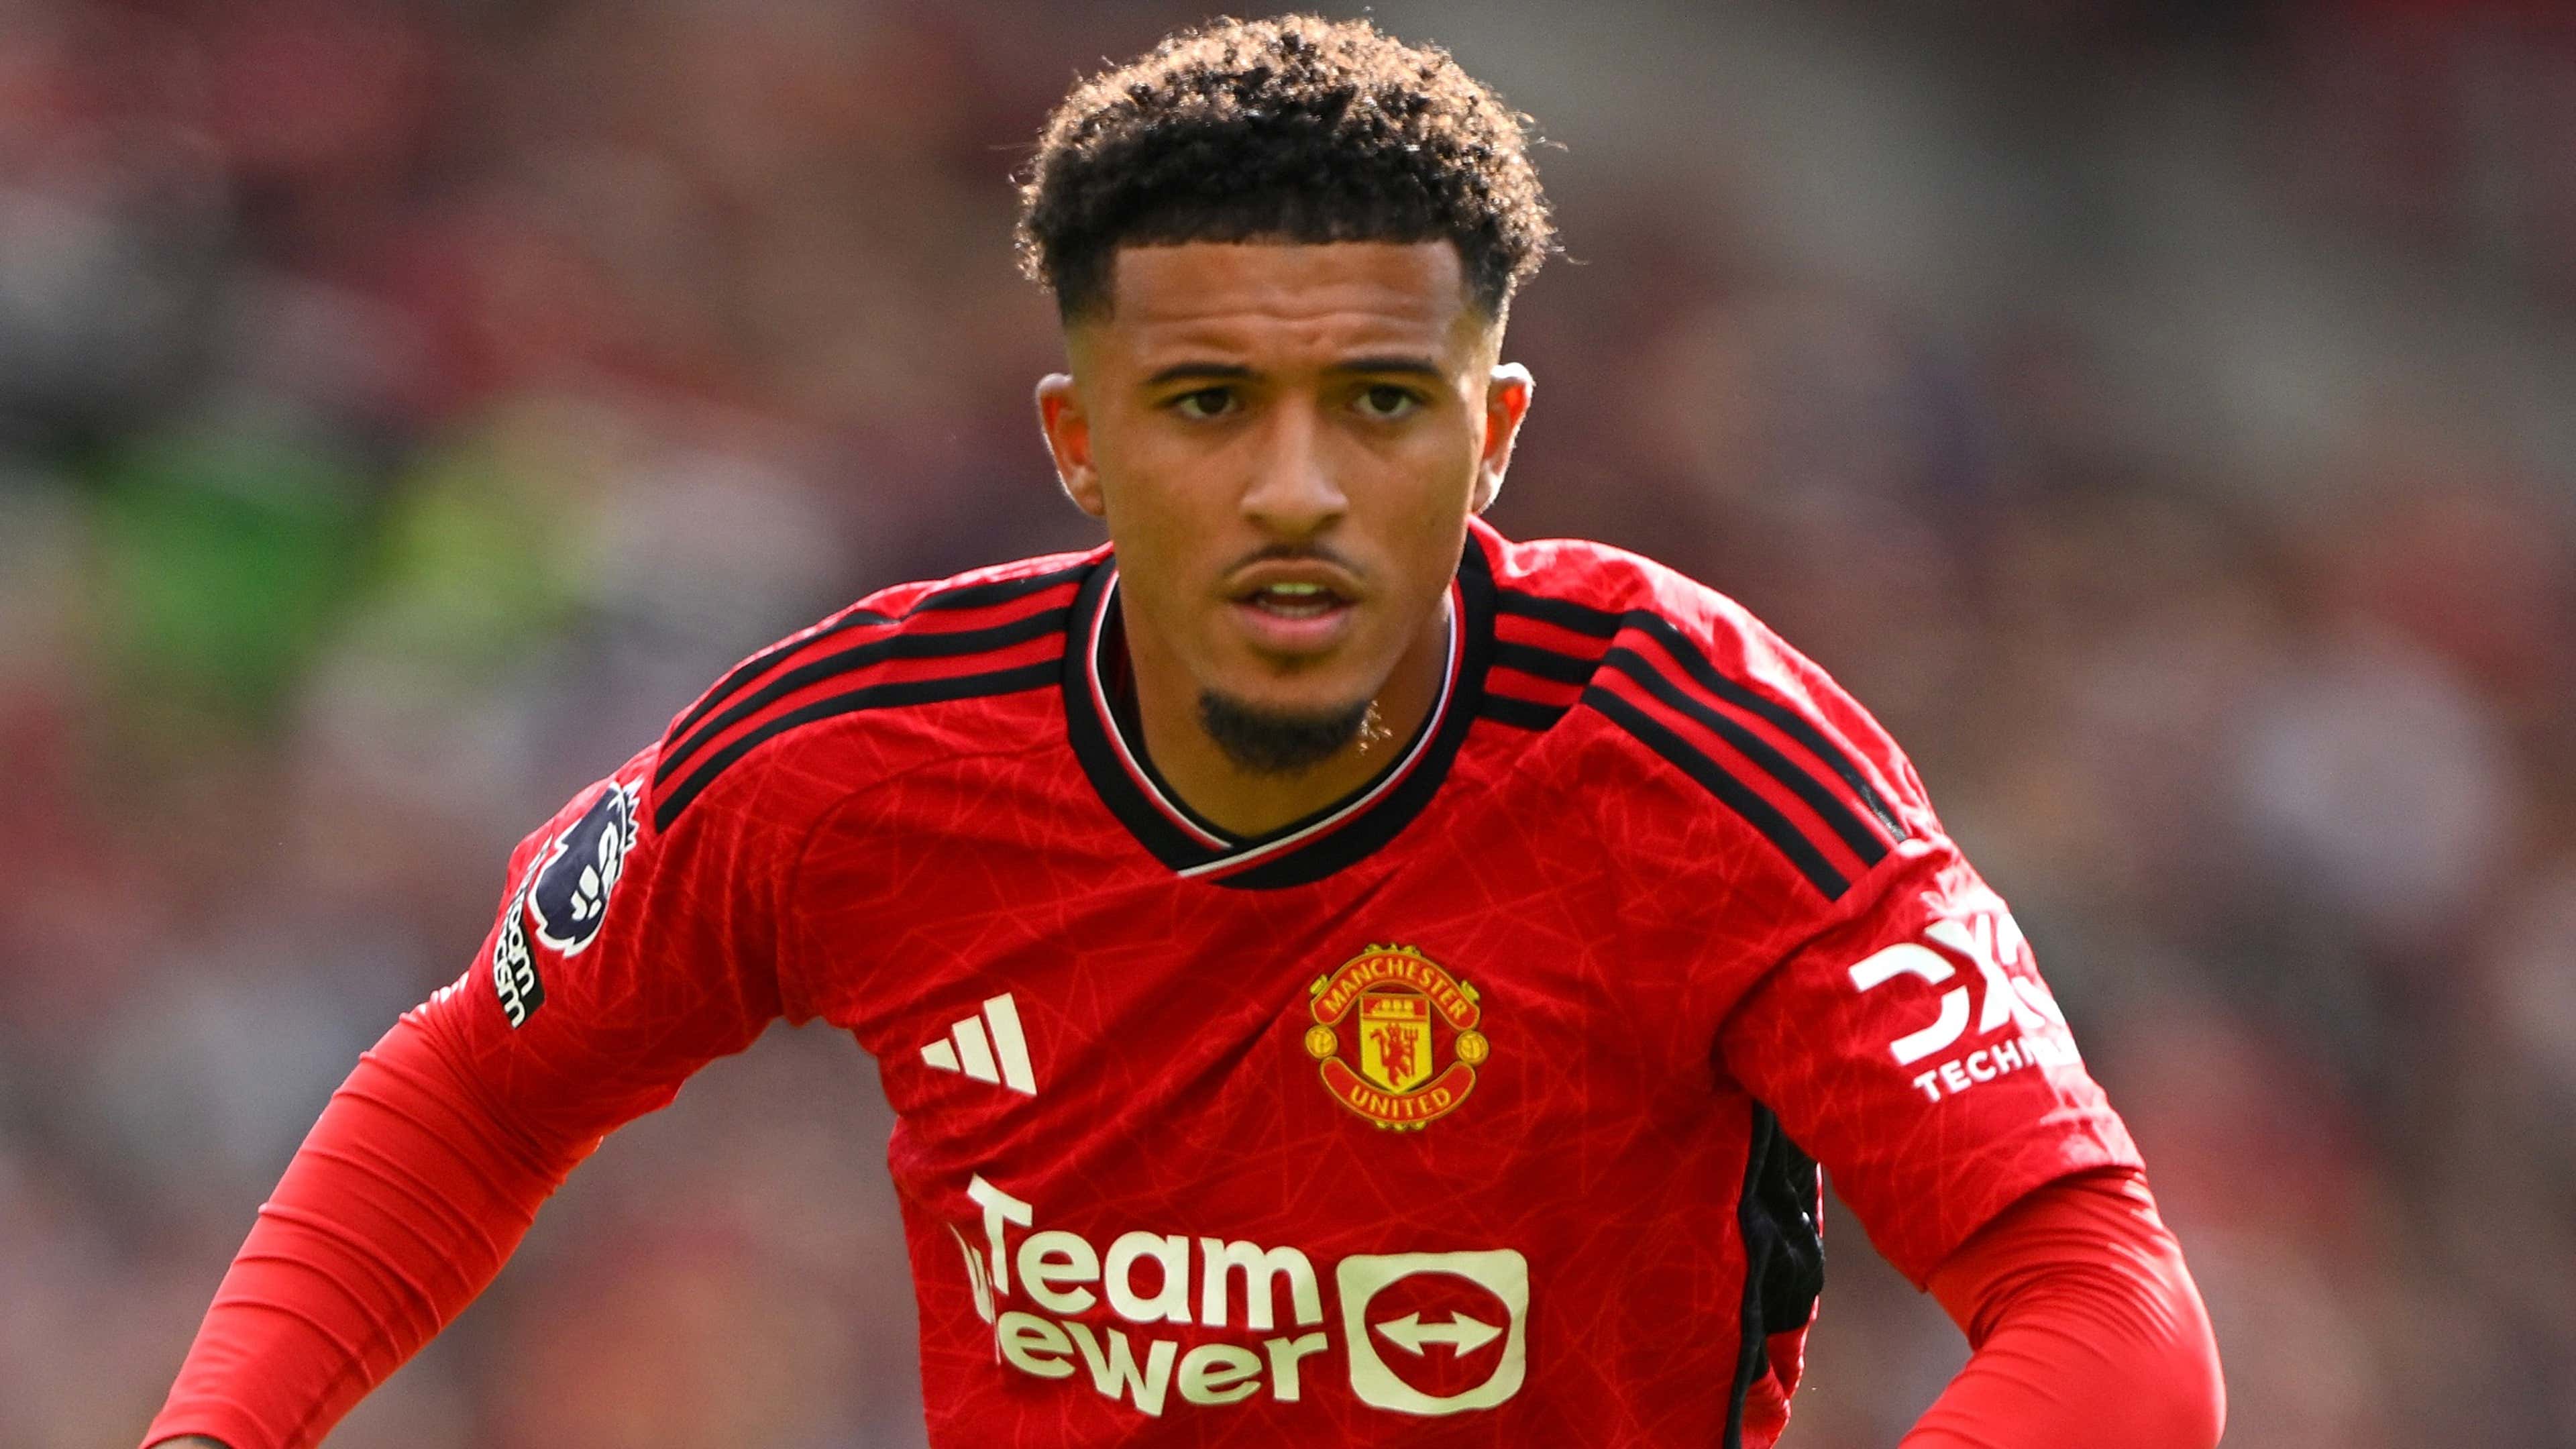 90 per cent over!' - Man Utd 'open to any offer' for Jadon Sancho